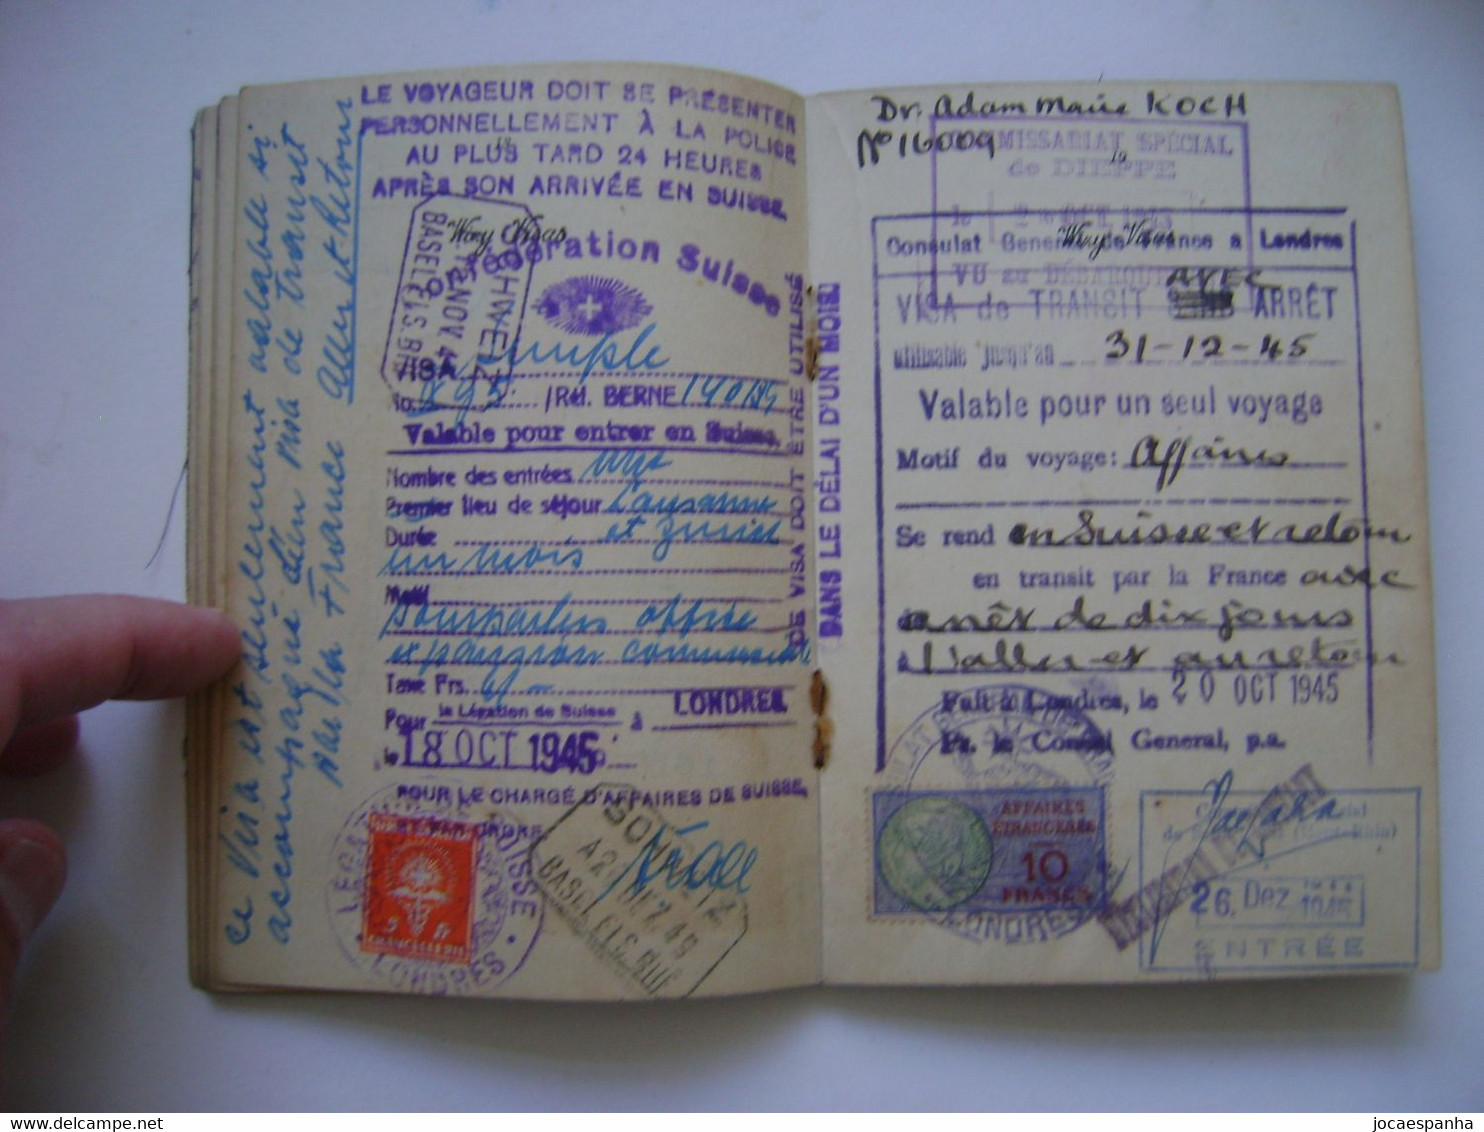 POLONIA / POLSKA - PASSPORT ISSUED BY THE CONSULATE IN LONDON IN 1945 IN THE STATE